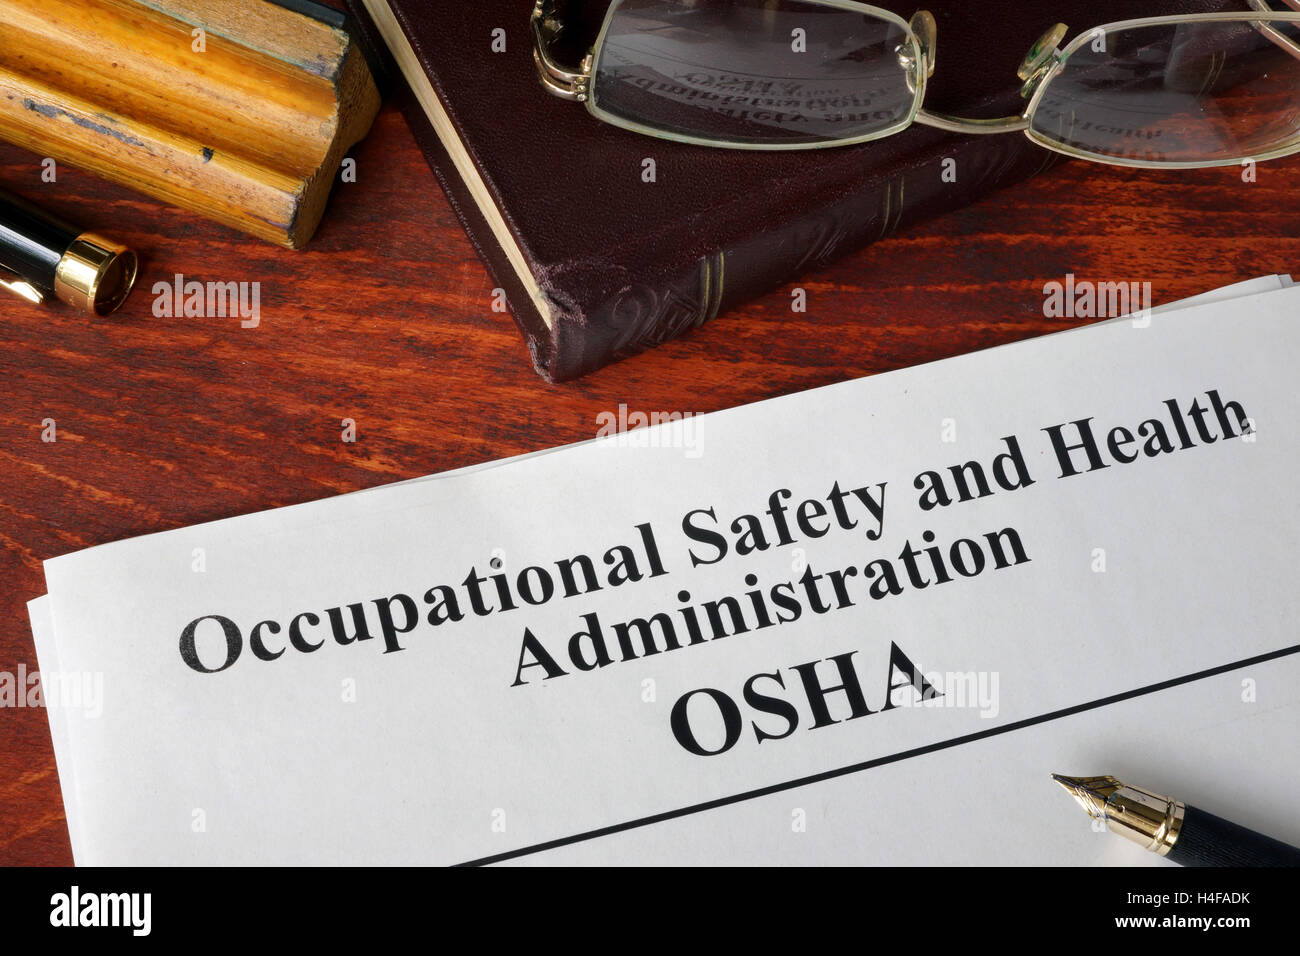 Occupational Safety and Health Administration  OSHA  and a book. Stock Photo